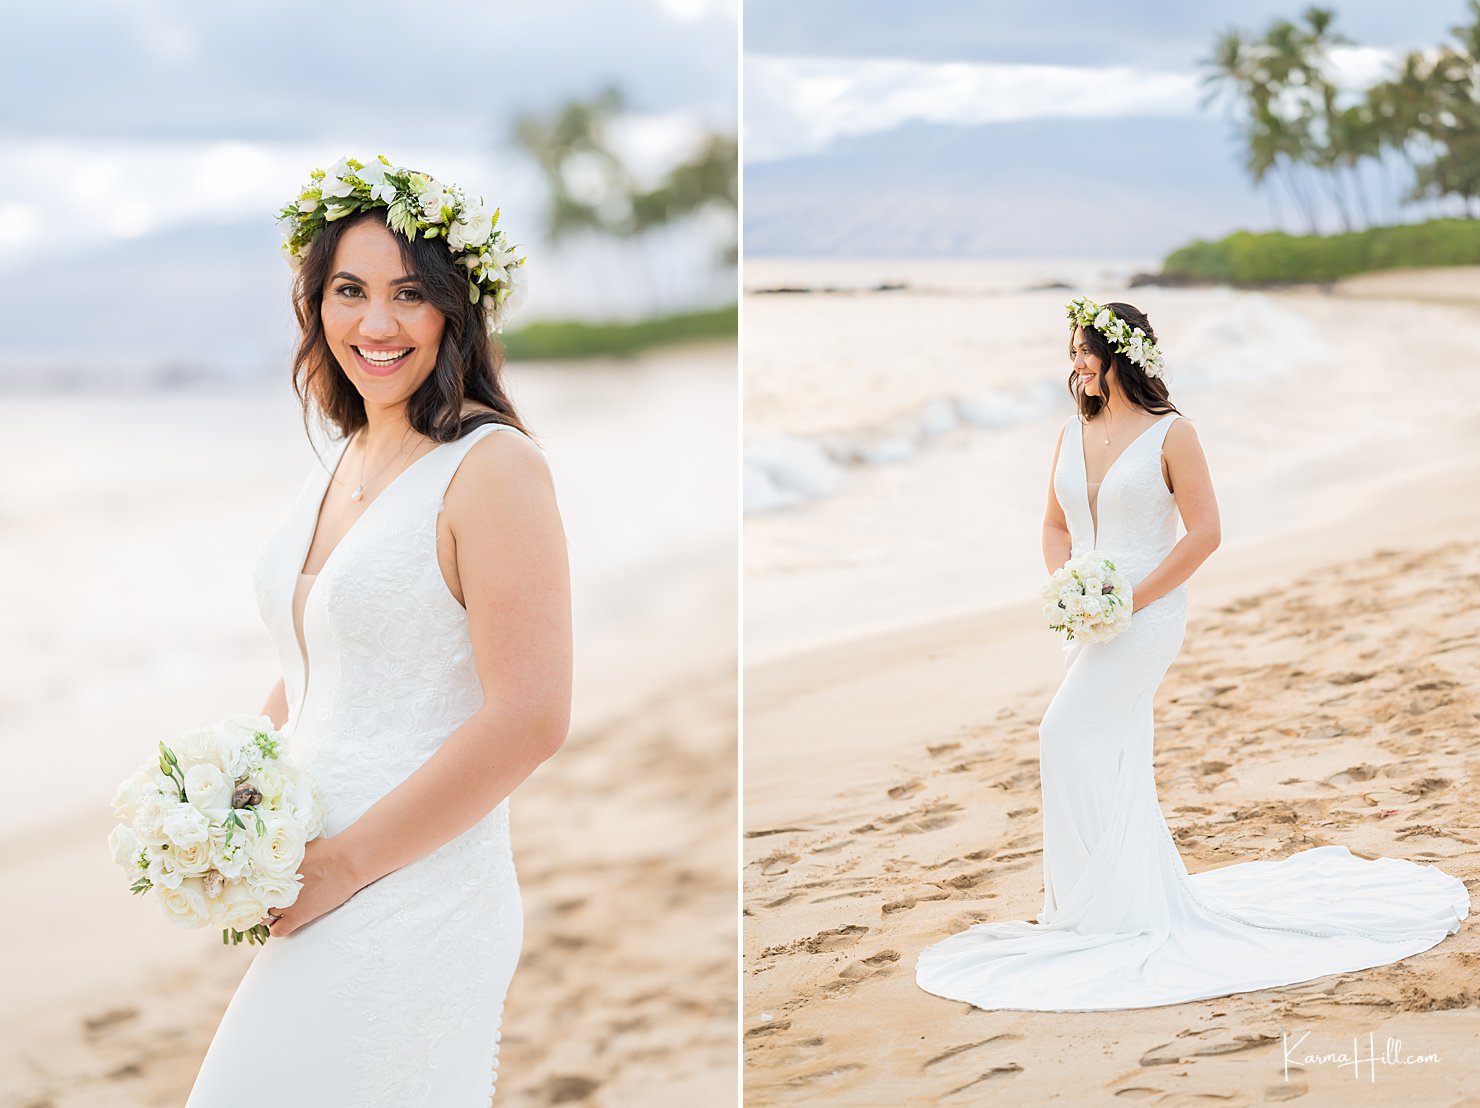 Simply Perfect - Mark & Brittany's Destination Wedding in Maui